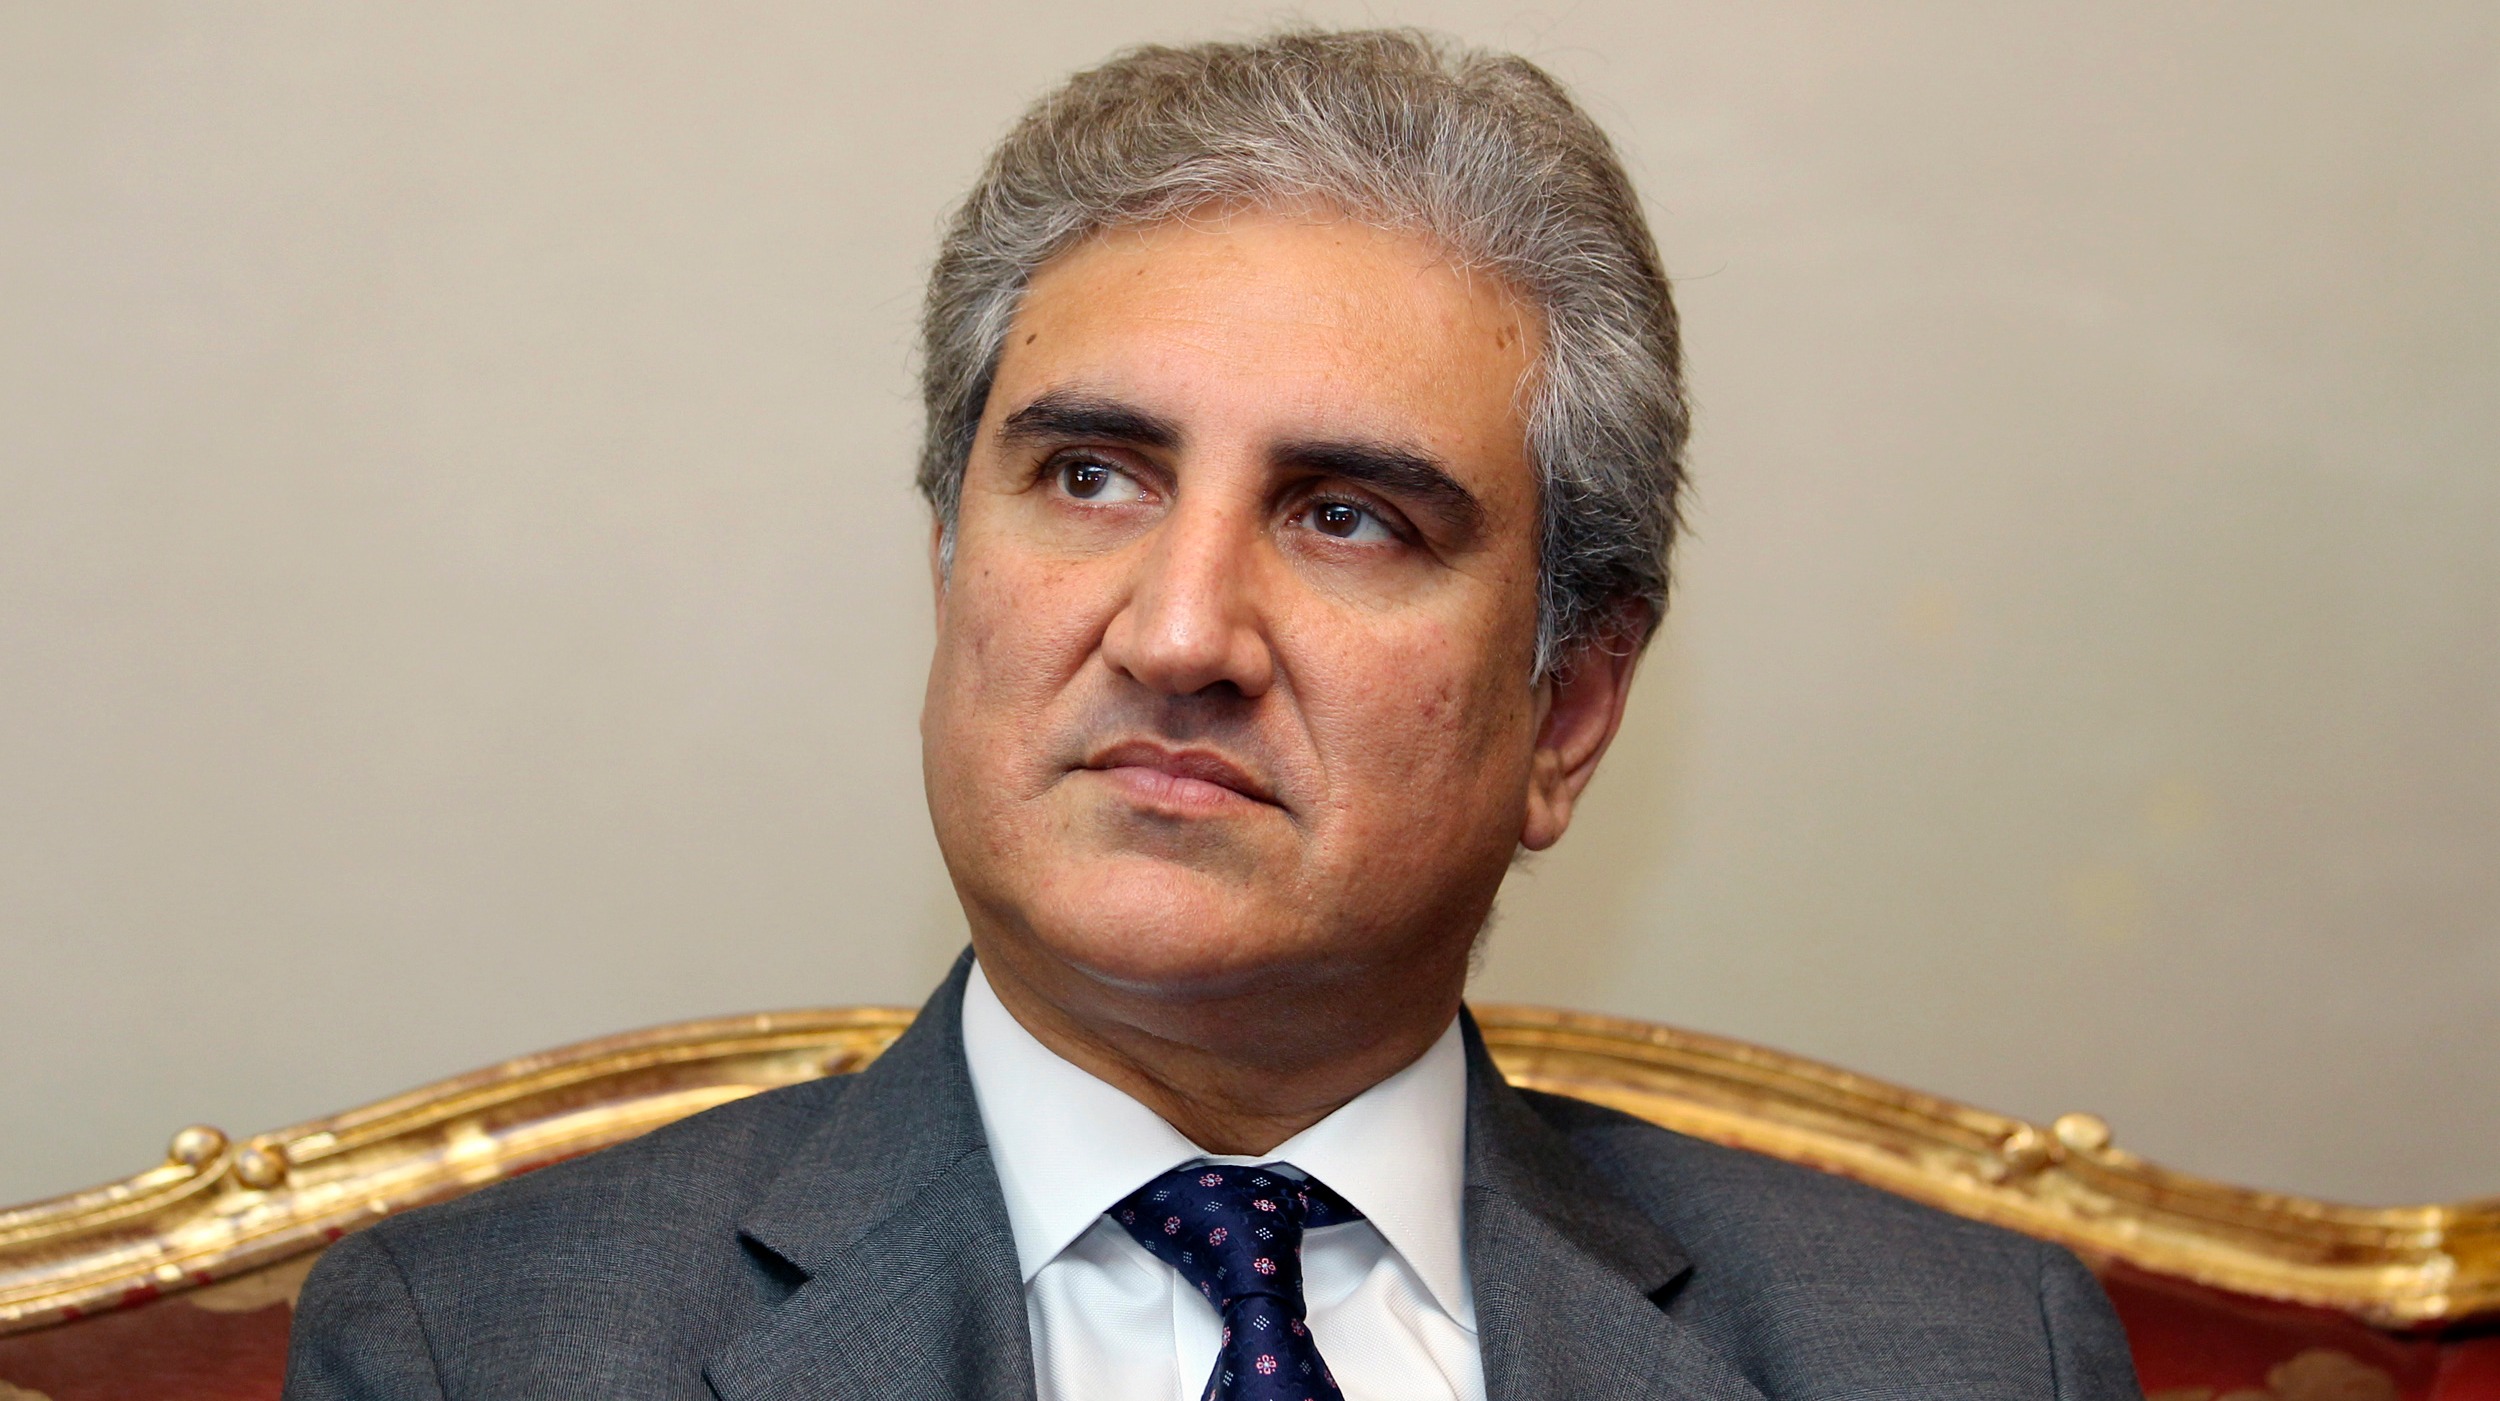 Govt shouldn’t make PIA’s privatization a personal issue, says Shah Mahmood Qureshi